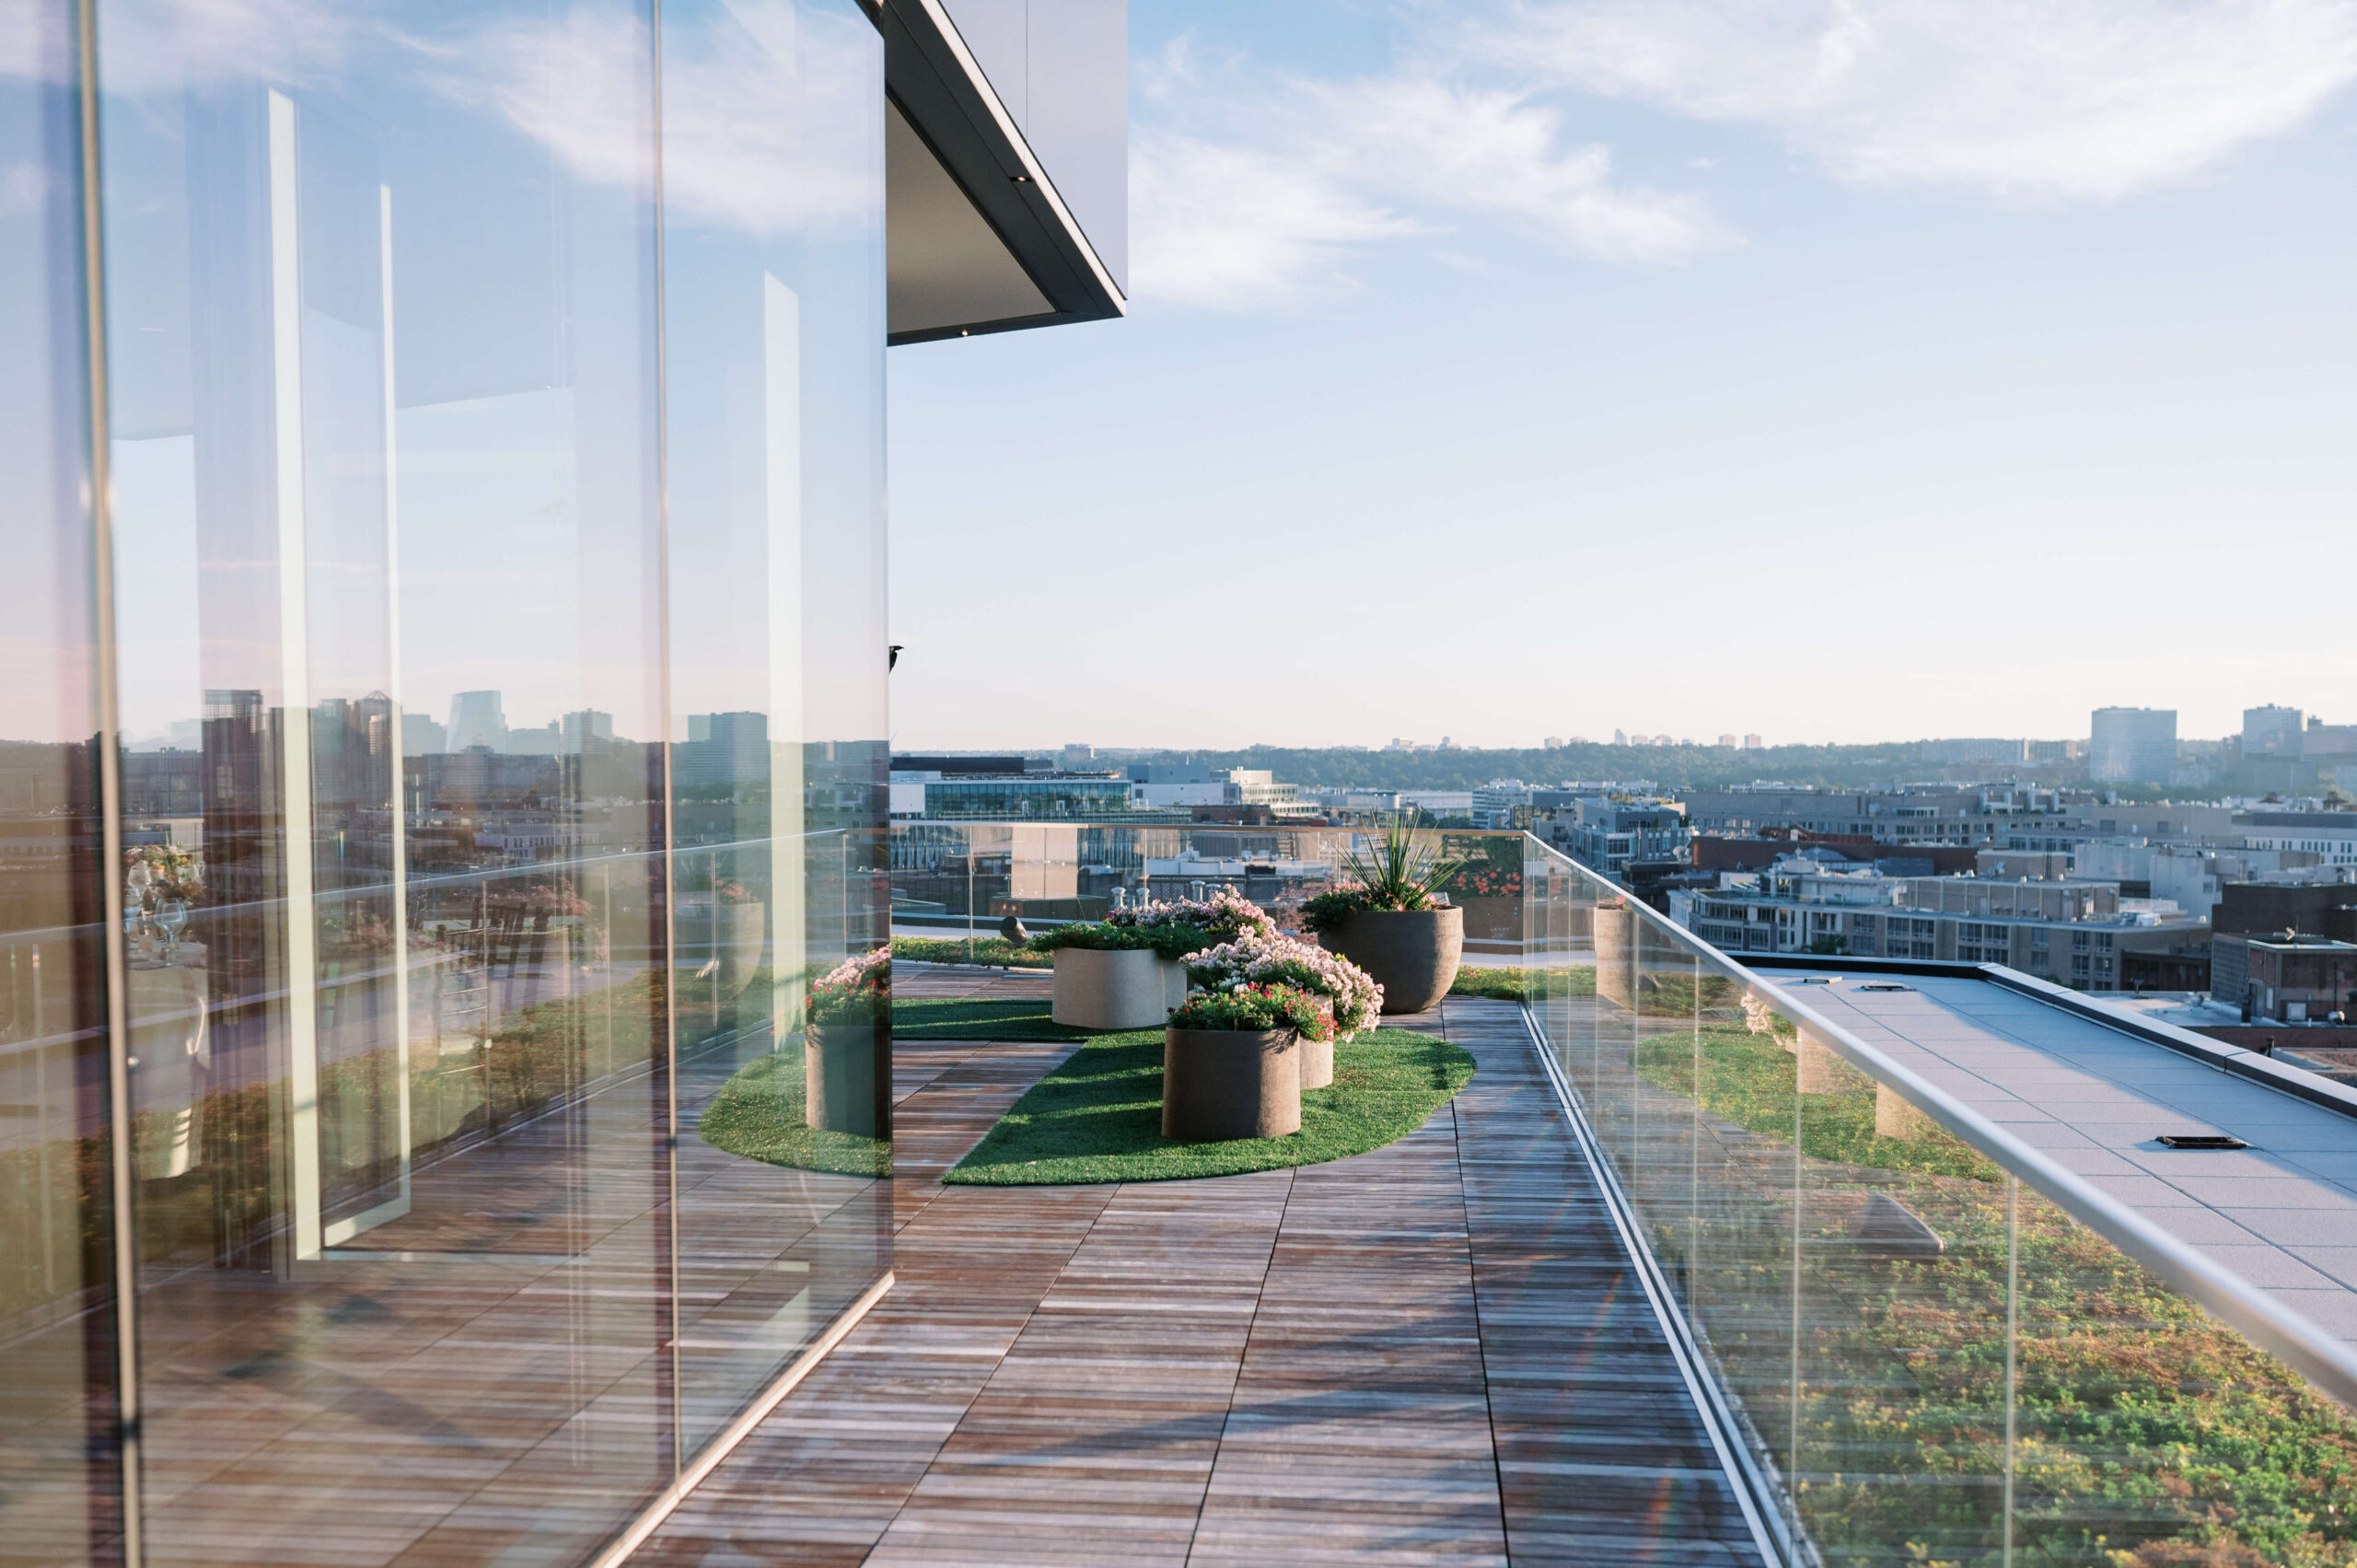 The Highpoint 1333 Wedding venue features spectacular views from its rooftop terrace